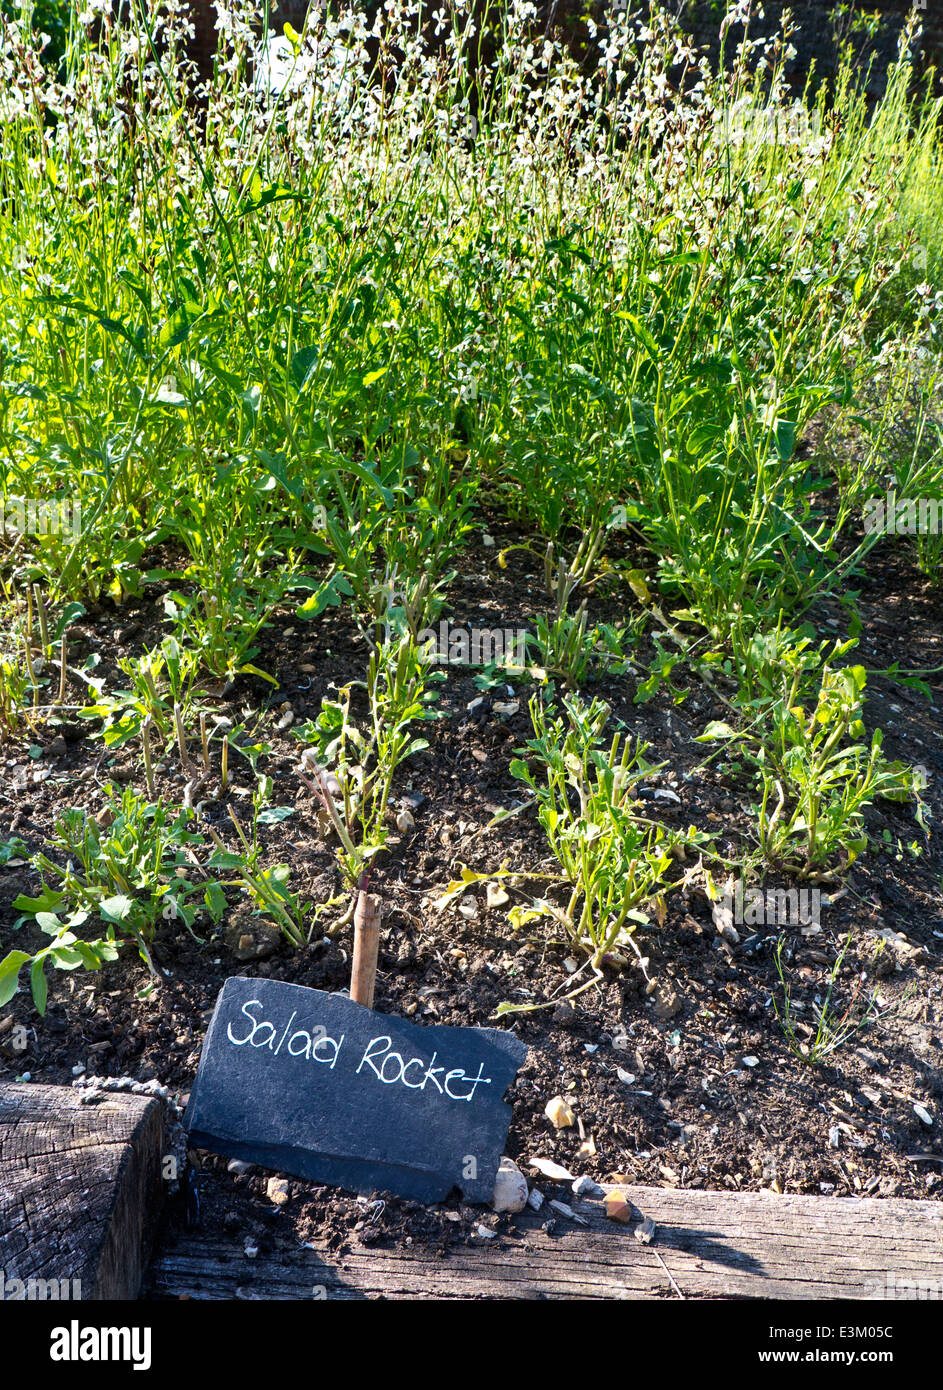 SALAD ROCKET Eruca sativa an edible annual plant, known as Salad Rocket growing in a kitchen garden with rustic slate name label in front Stock Photo